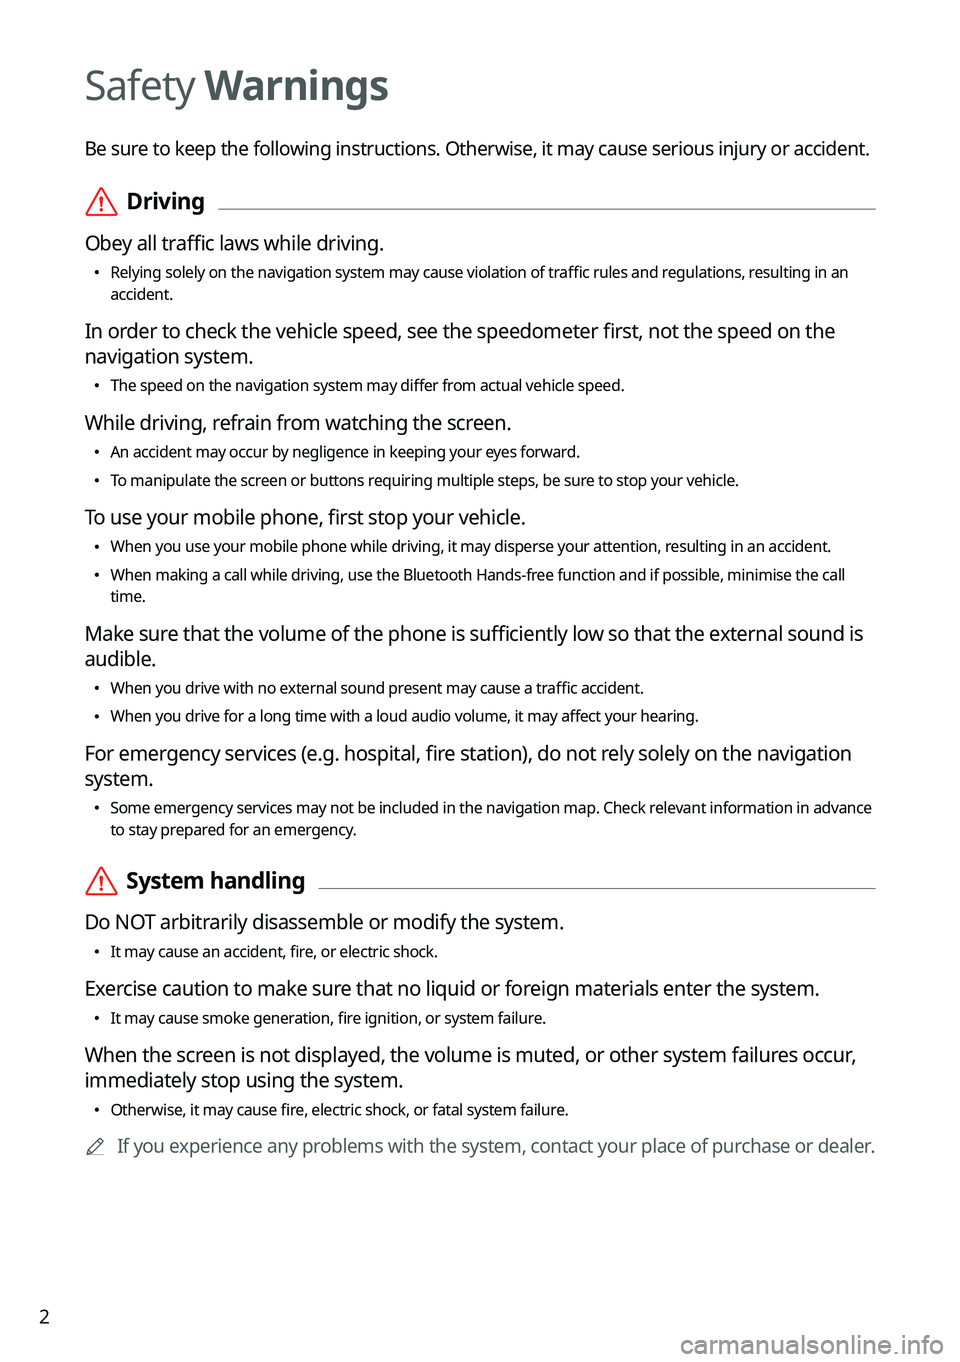 KIA CARNIVAL 2023  Navigation System Quick Reference Guide 2
Safety Warnings
Be sure to keep the following instructions. Otherwise, it may cause serious injury or accident.
 ÝDriving
Obey all traffic laws while driving.
 •
Relying solely on the navigation 